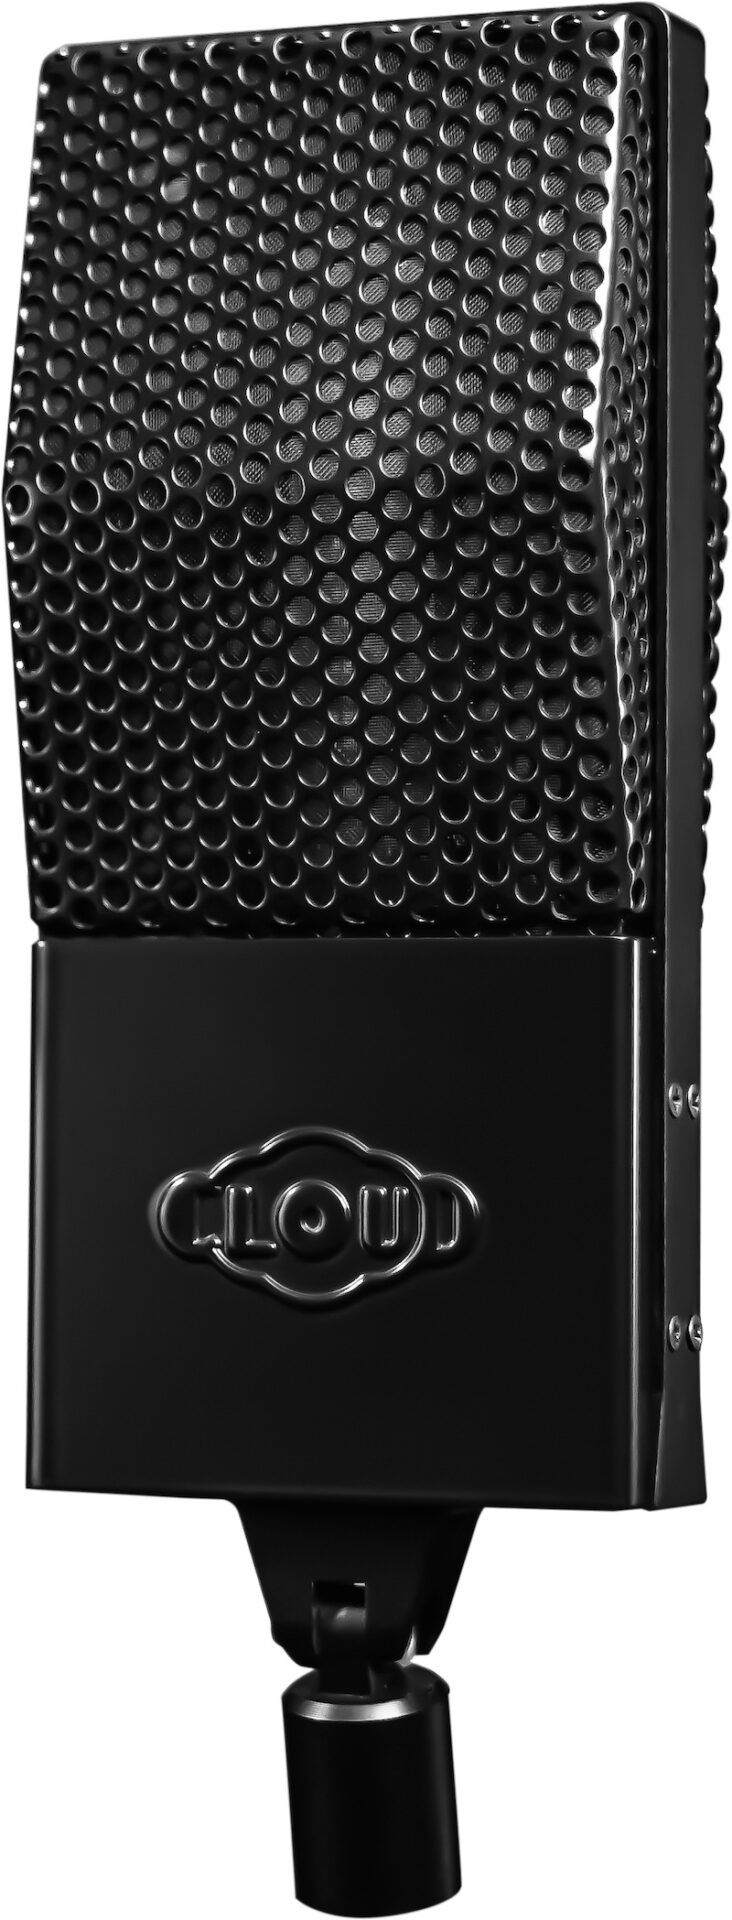 New Gear Alert: Cloud 44 Passive Ribbon Mic, MyFOH by Waves, NUGEN Audio’s Halo Vision & More